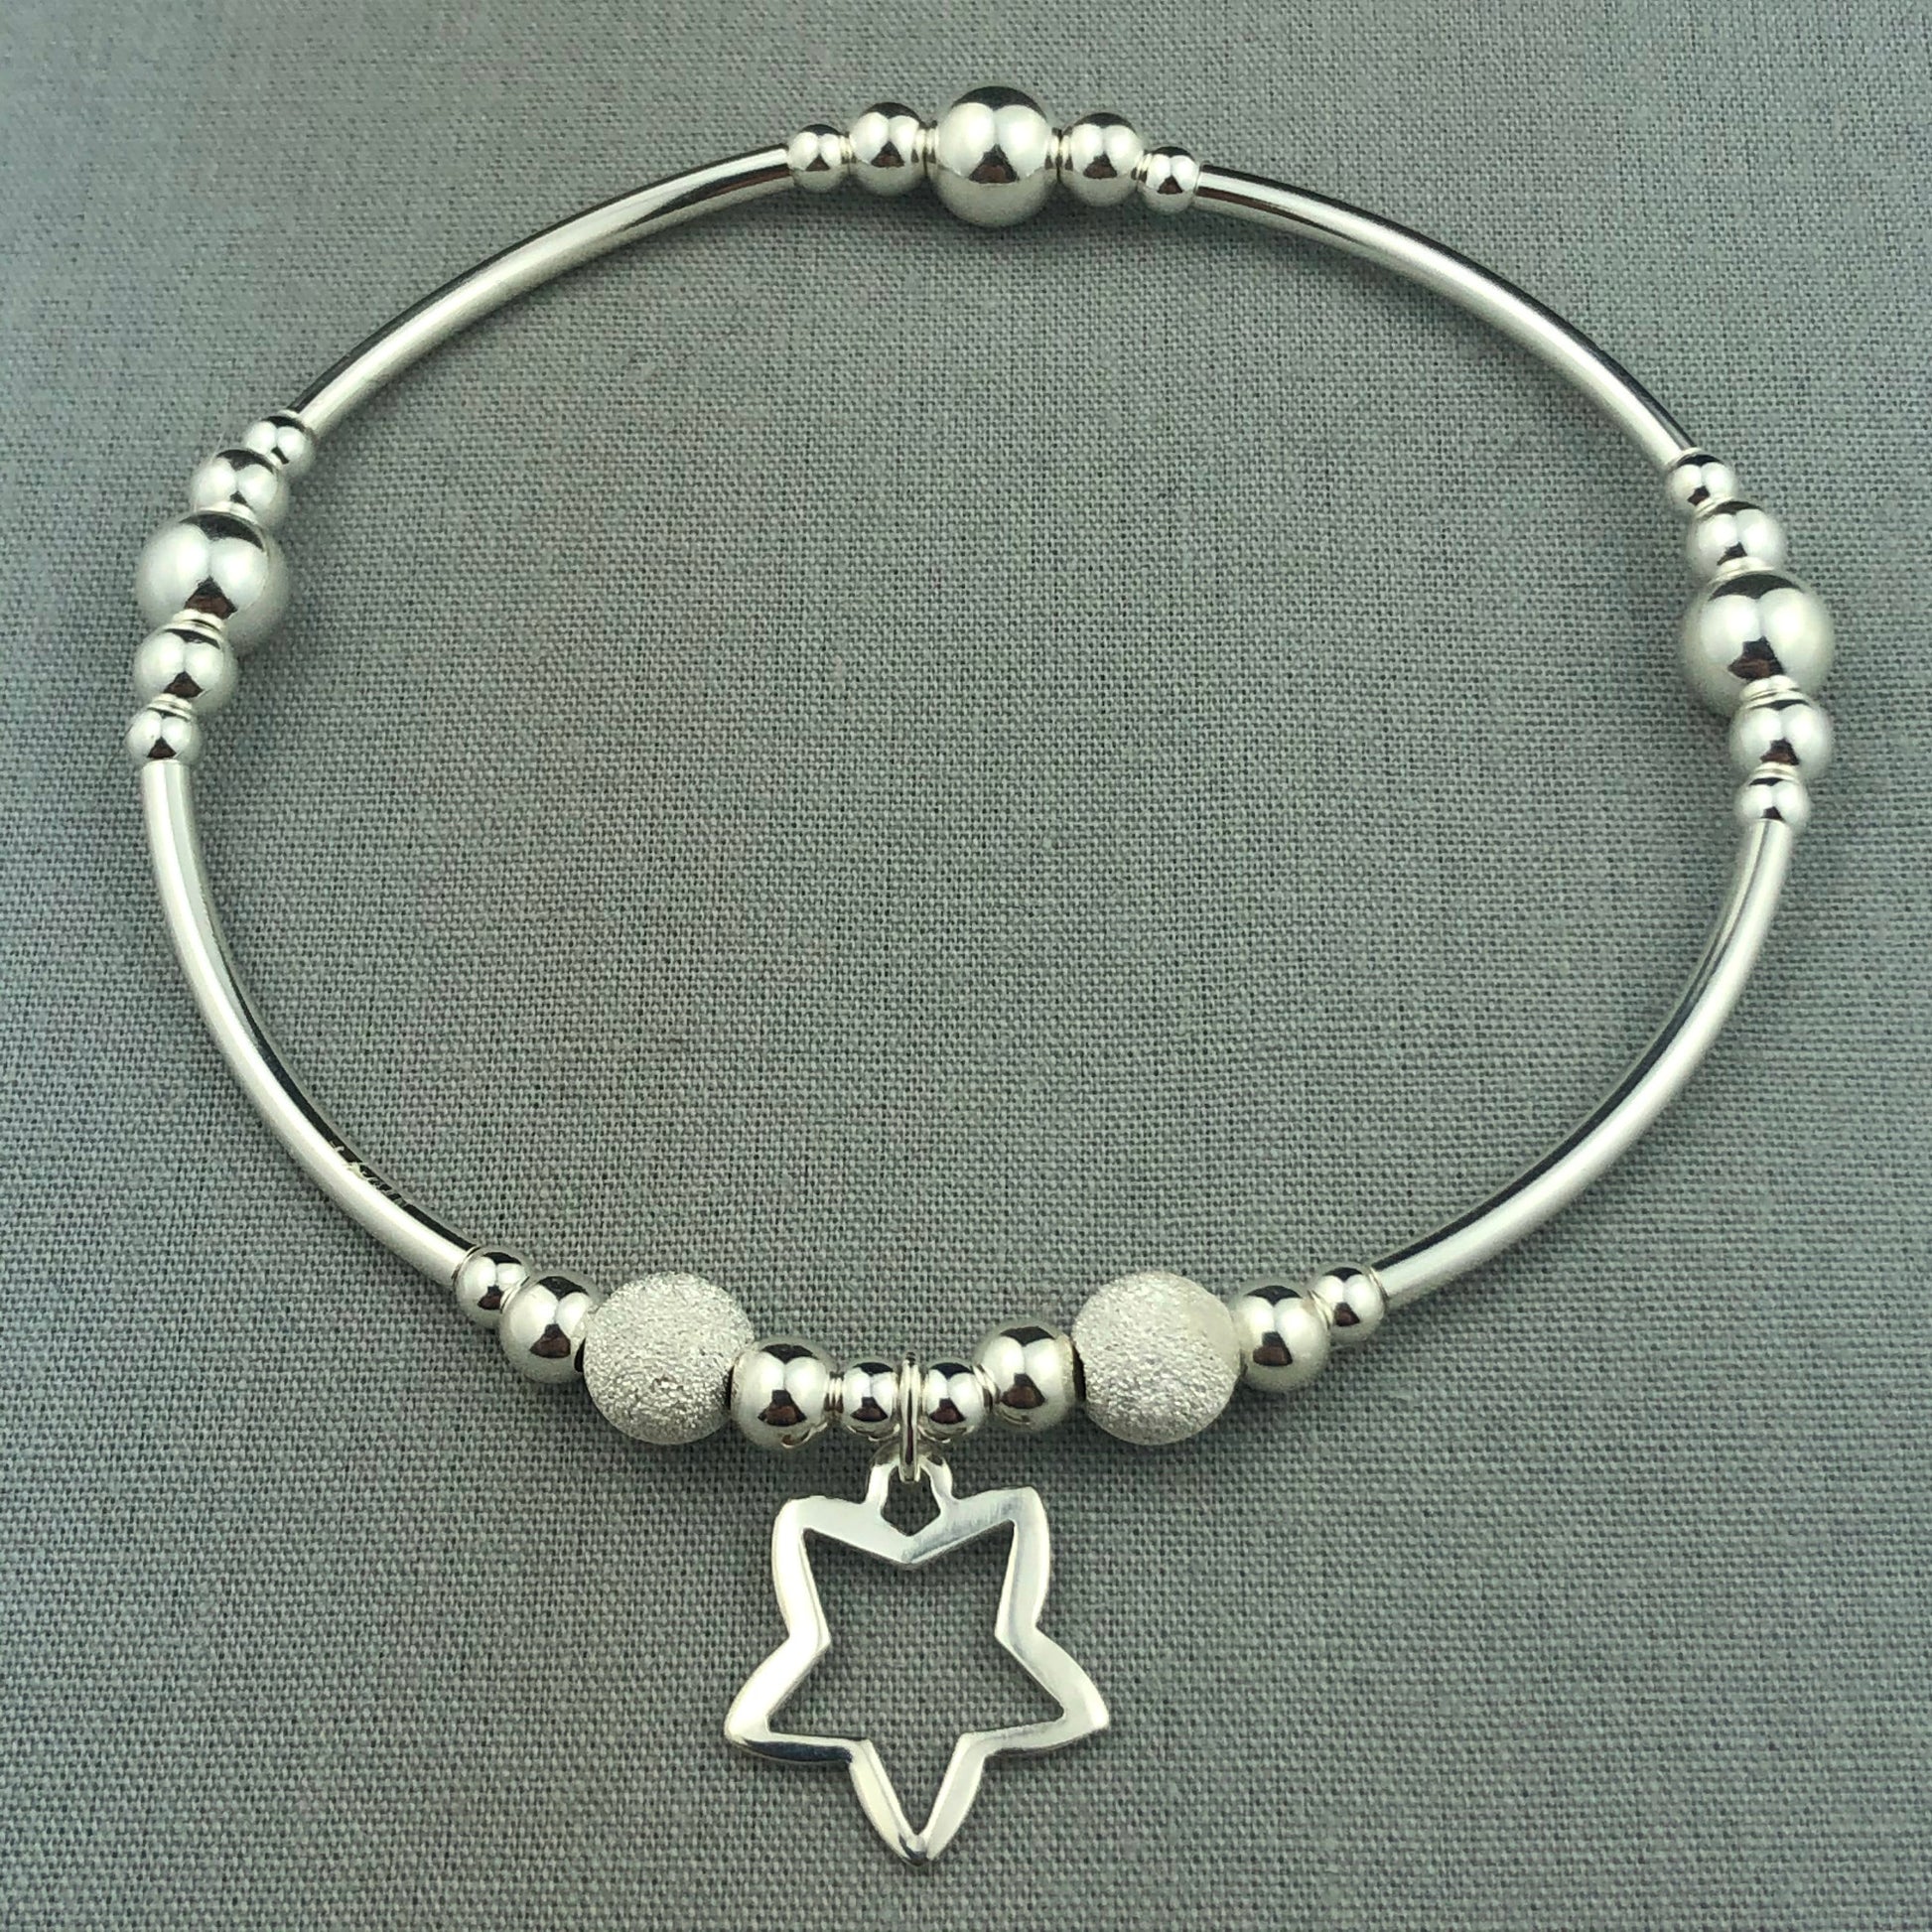 Open star charm women's sterling silver stacking charm bracelet by My Silver Wish